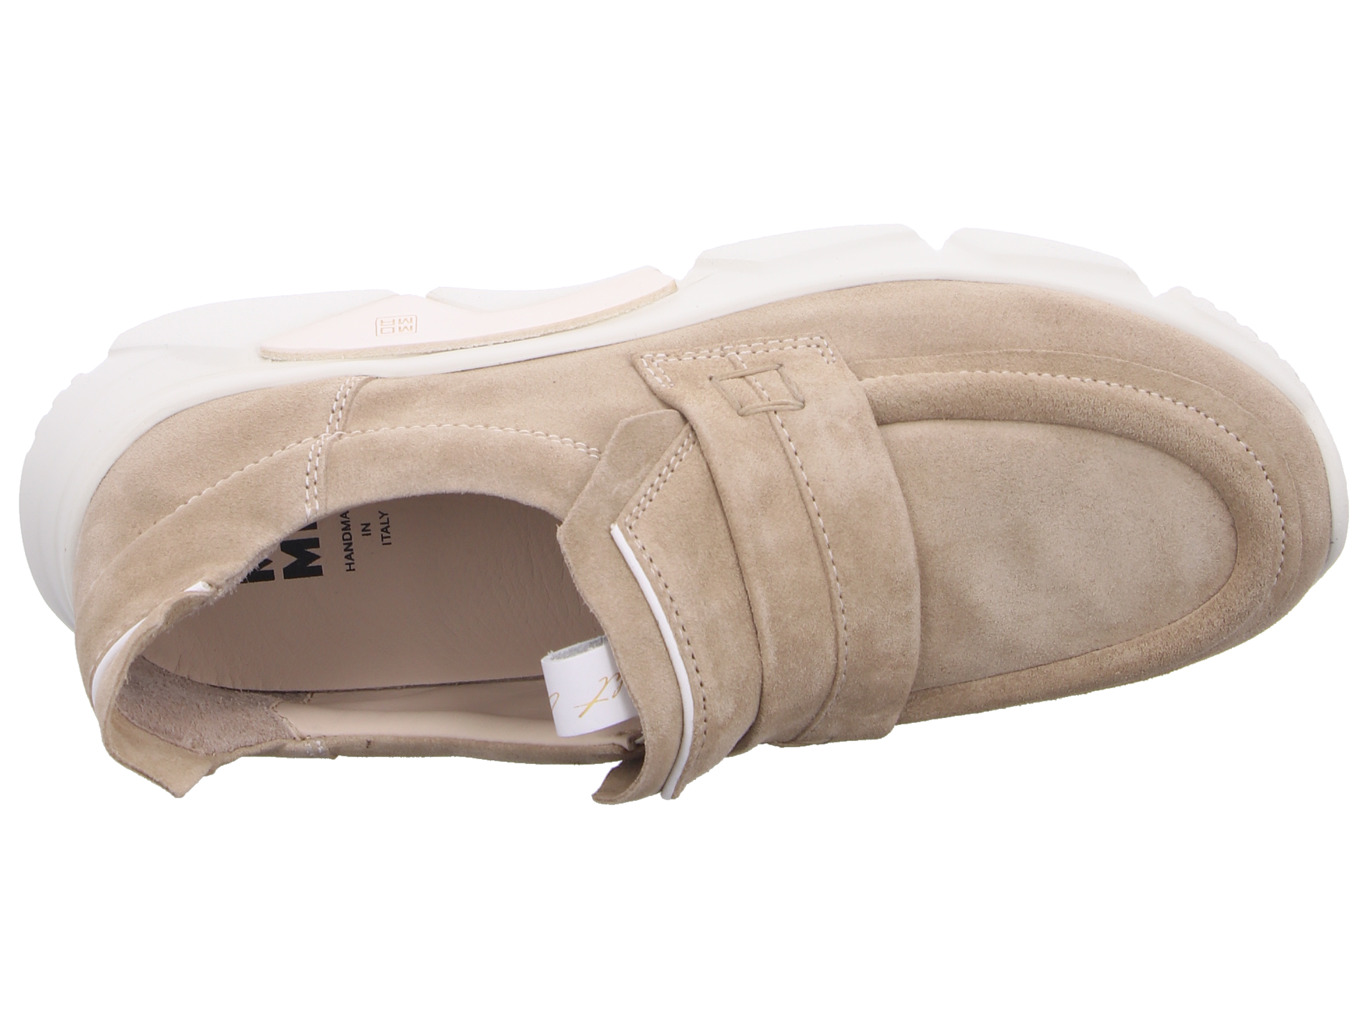 moma_pantofola_donna_beige_hell_3fs102_to_toy_visone_7177